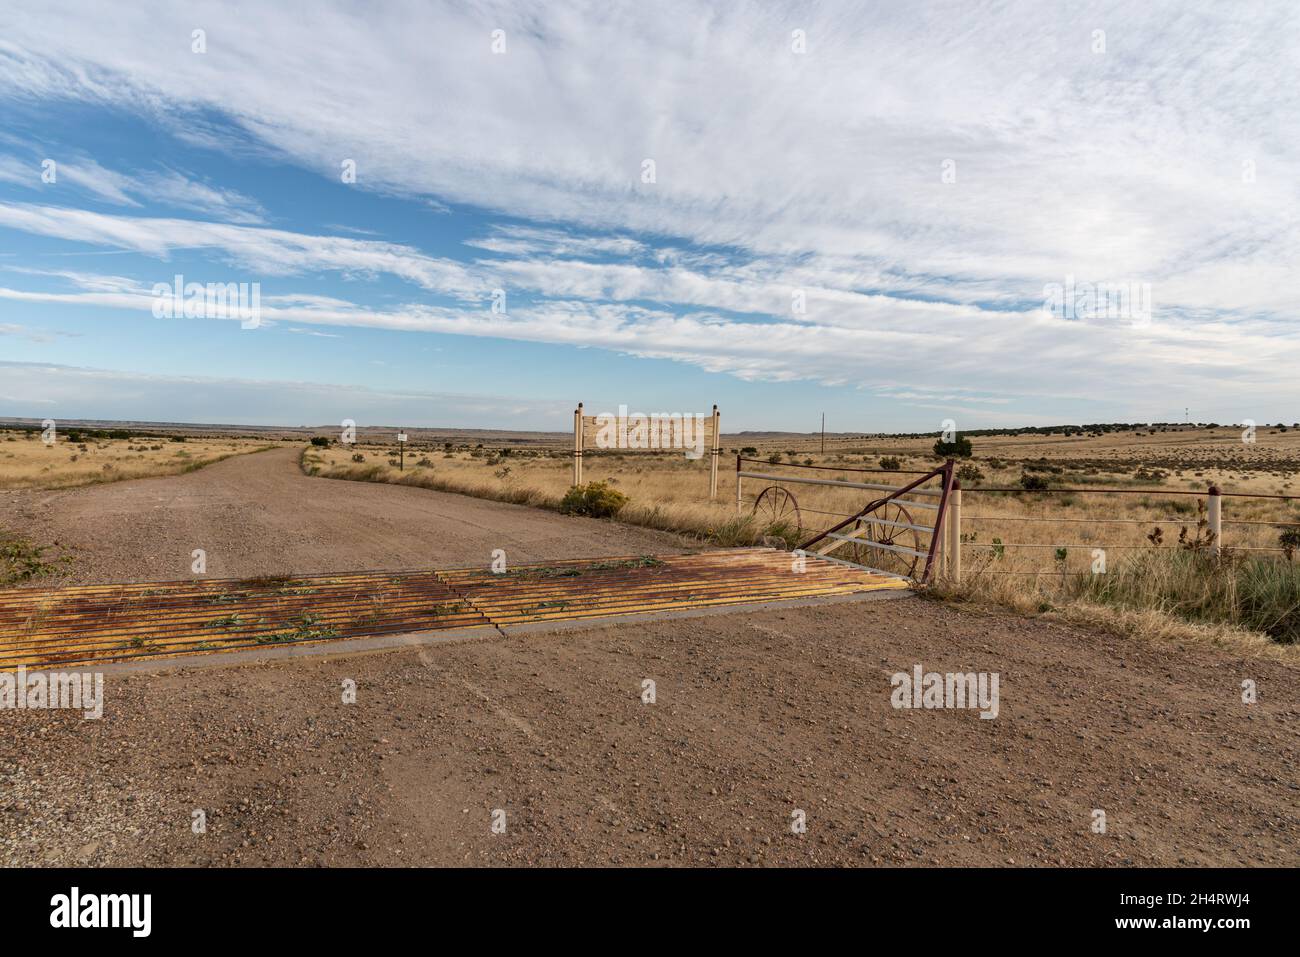 Longshot of the Red Top Ranch in the semiarid Great Plains in Pueblo County, Colorado, a cattle guard at the entrance. Stock Photo